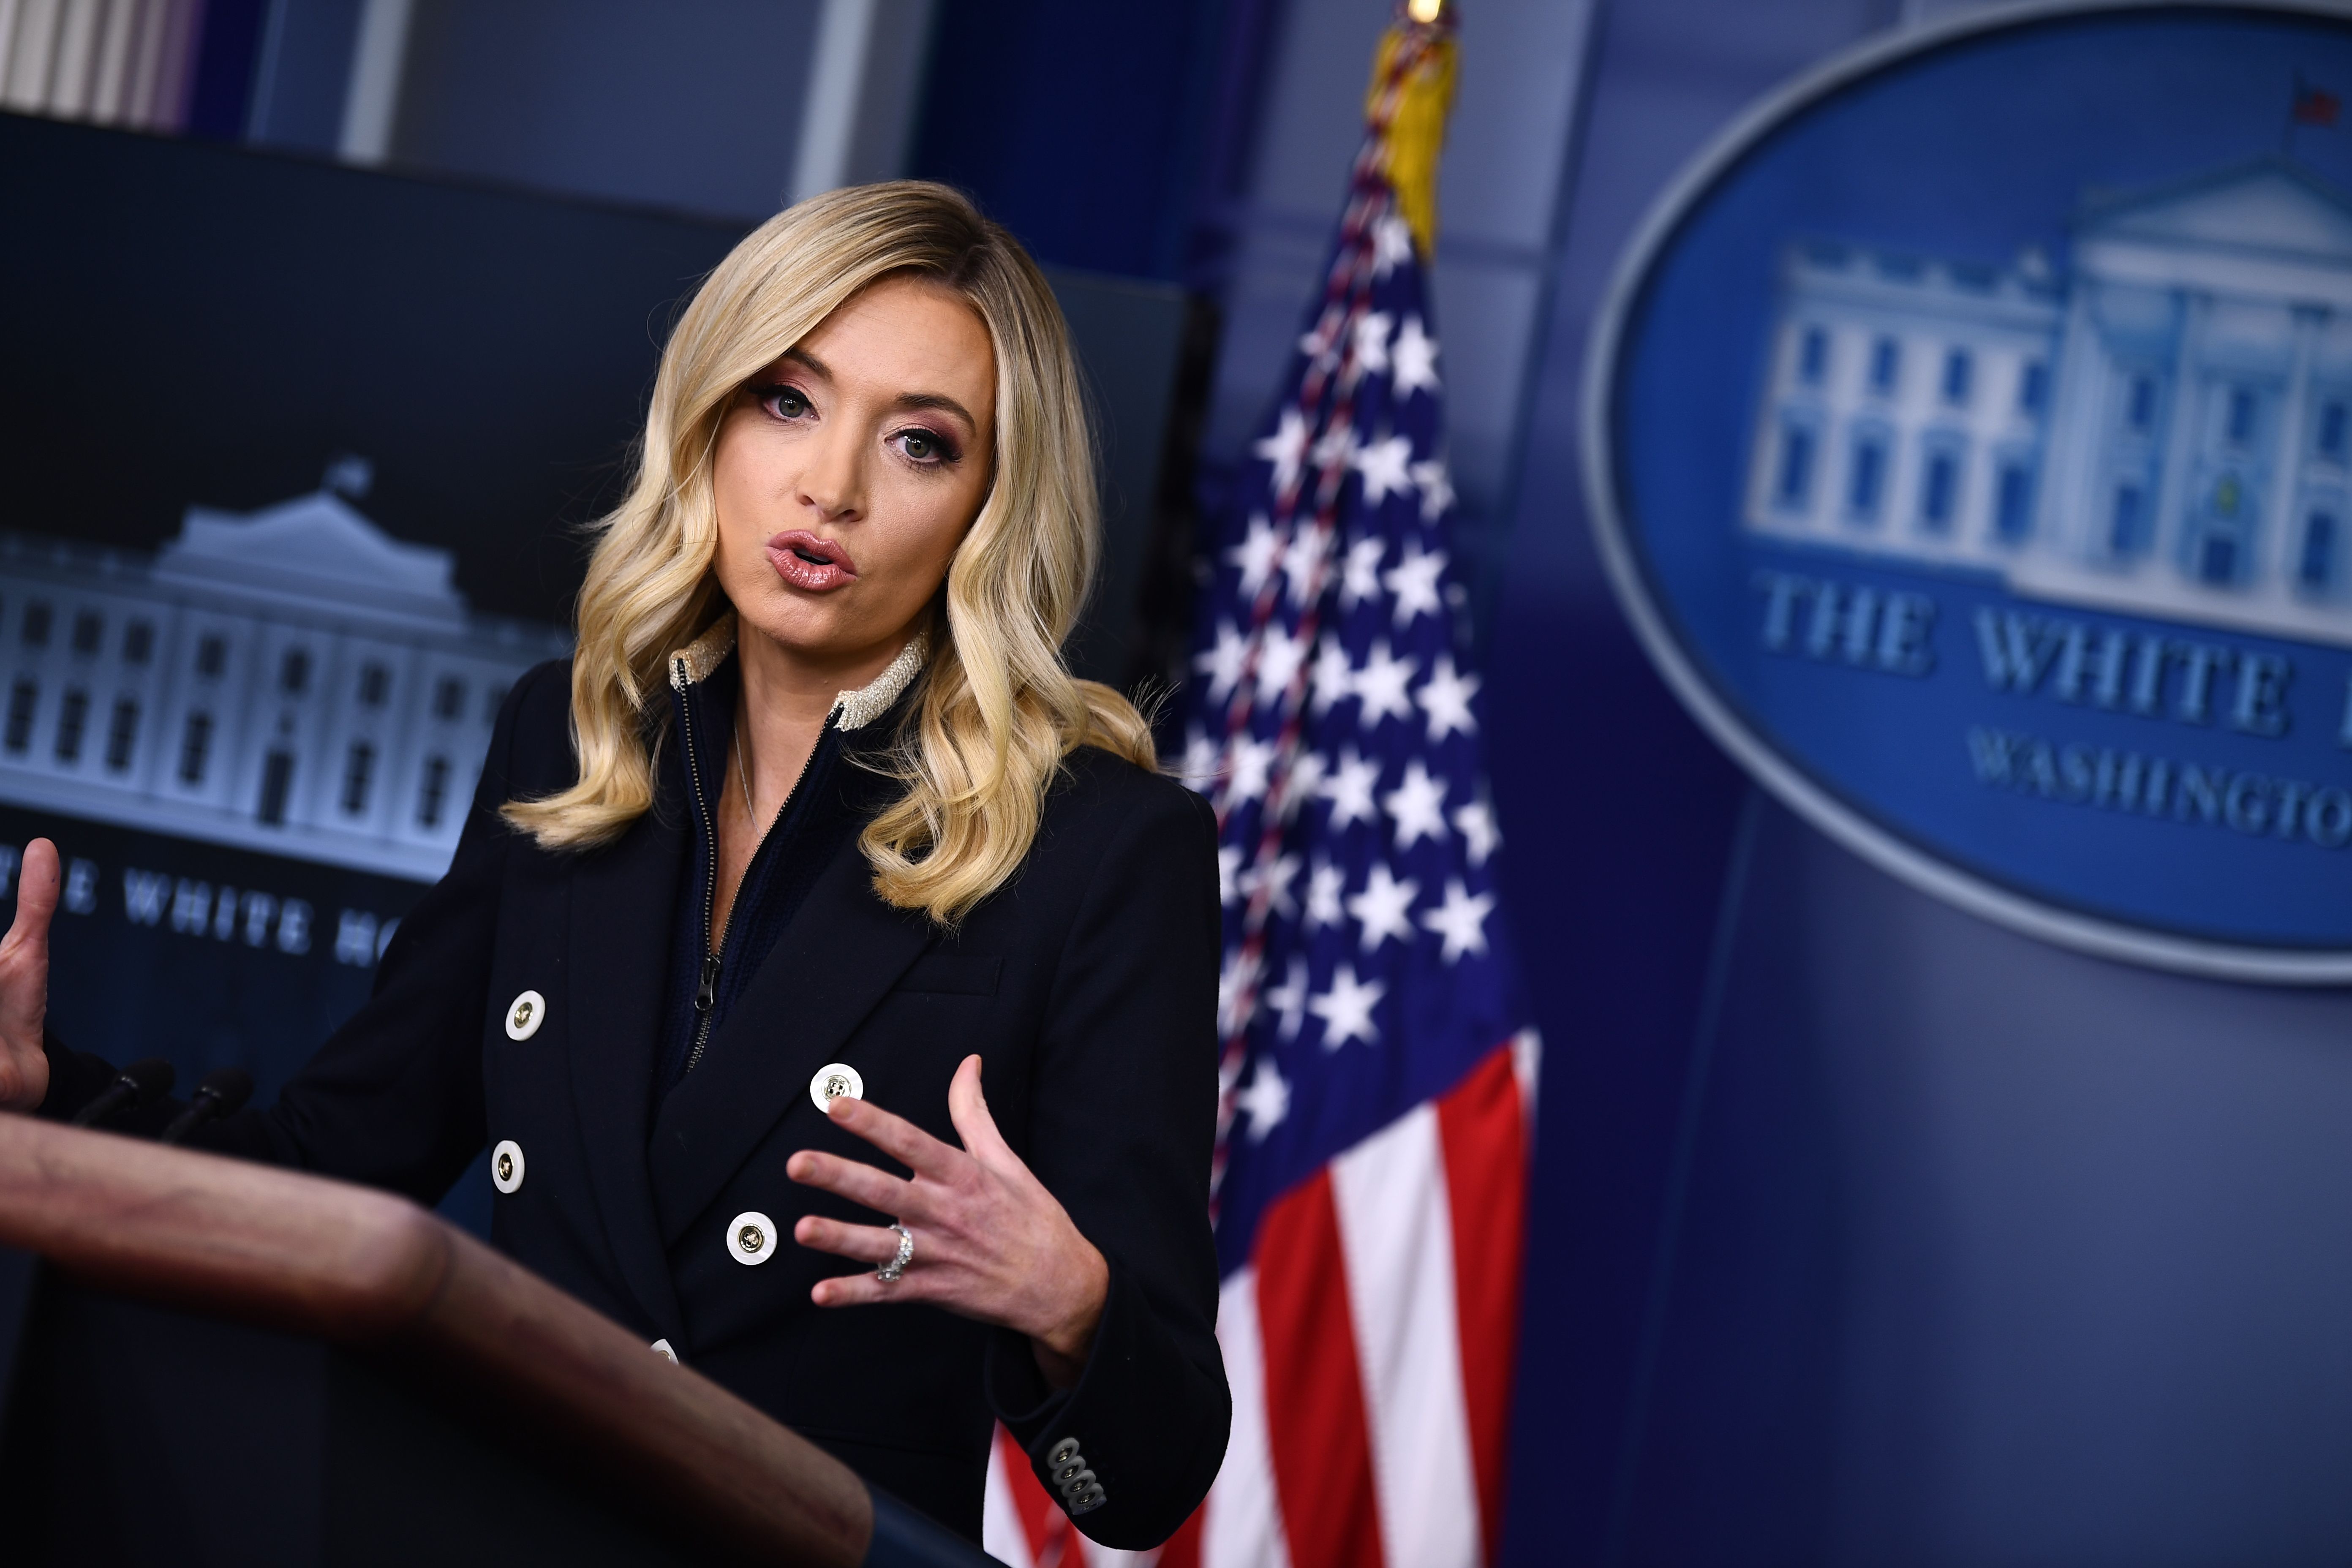 White House Press Secretary Kayleigh McEnany speaks to the press on June 1, 2020, in the Brady Briefing Room of the White House in Washington, DC. (Photo by Brendan Smialowski / AFP) (Photo by BRENDAN SMIALOWSKI/AFP via Getty Images)White House Press Secretary Kayleigh McEnany speaks to the press on June 1, 2020, in the Brady Briefing Room of the White House in Washington, DC. (Photo by BRENDAN SMIALOWSKI/AFP via Getty Images)